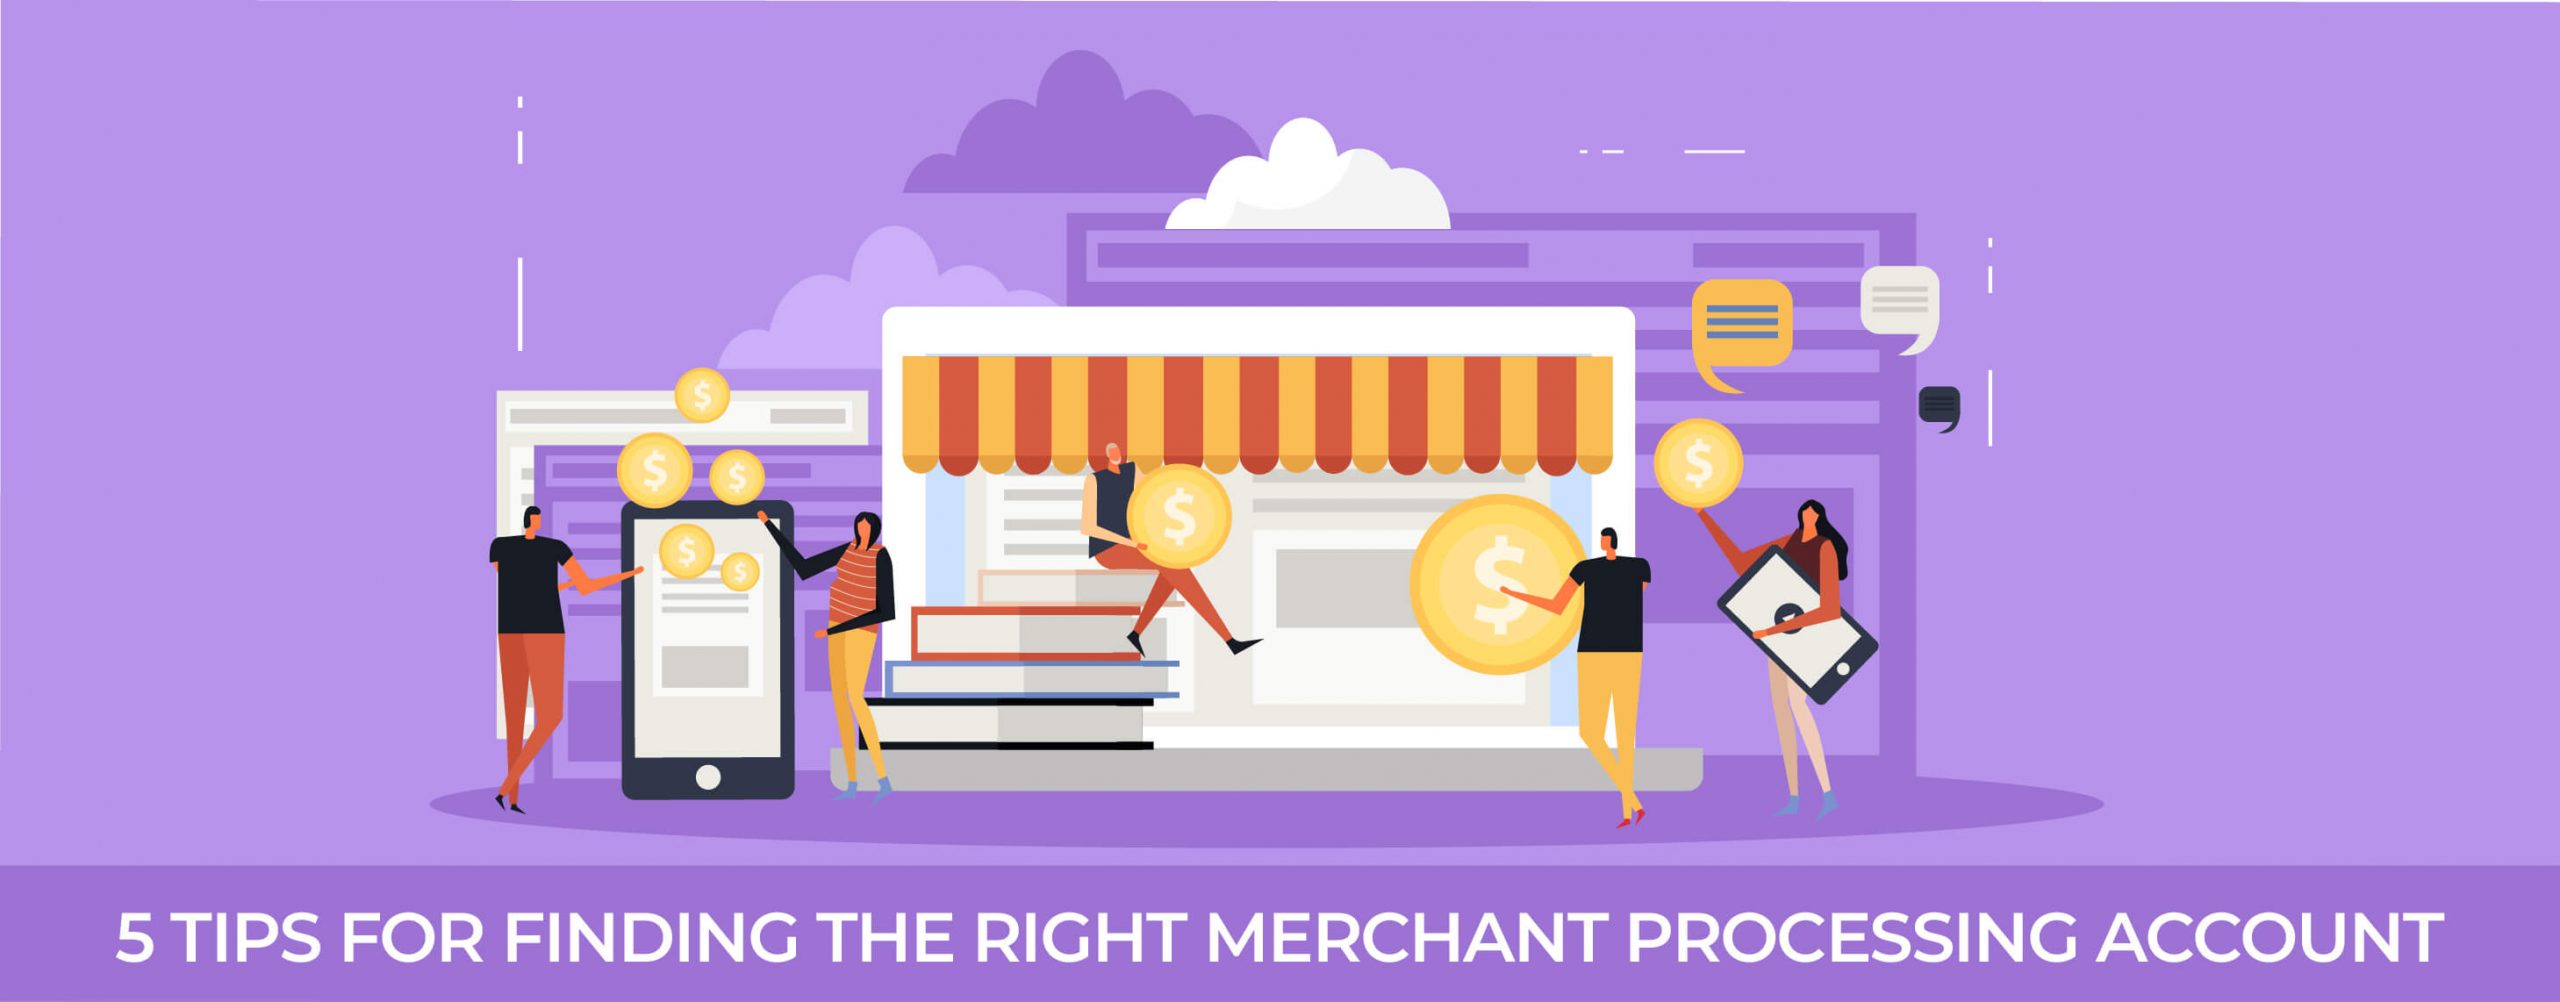 5 TIPS FOR FINDING THE RIGHT MERCHANT ROCESSING ACCOUNT